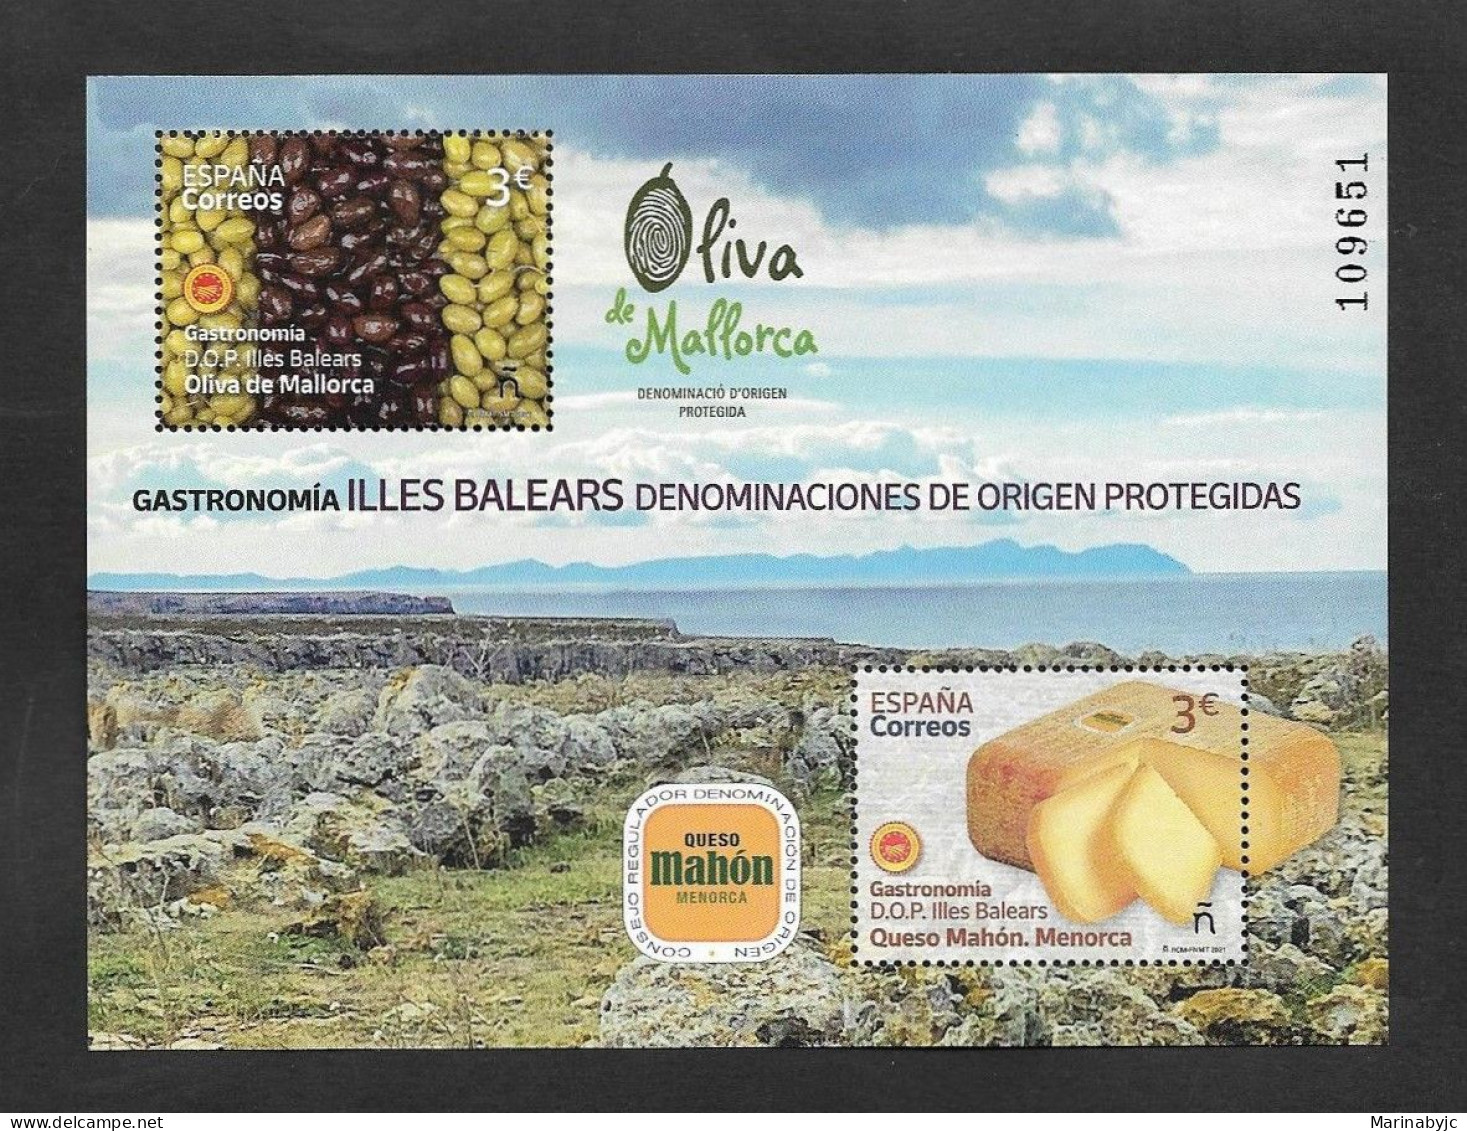 Vtaebm.SE)2021 SPAIN, GASTRONOMY OF THE BALEARIC ISLANDS, TWO STAMPS DEDICATED TO LAS OLIVAS DE MALLORCA AND MAHÓN CHE - Used Stamps